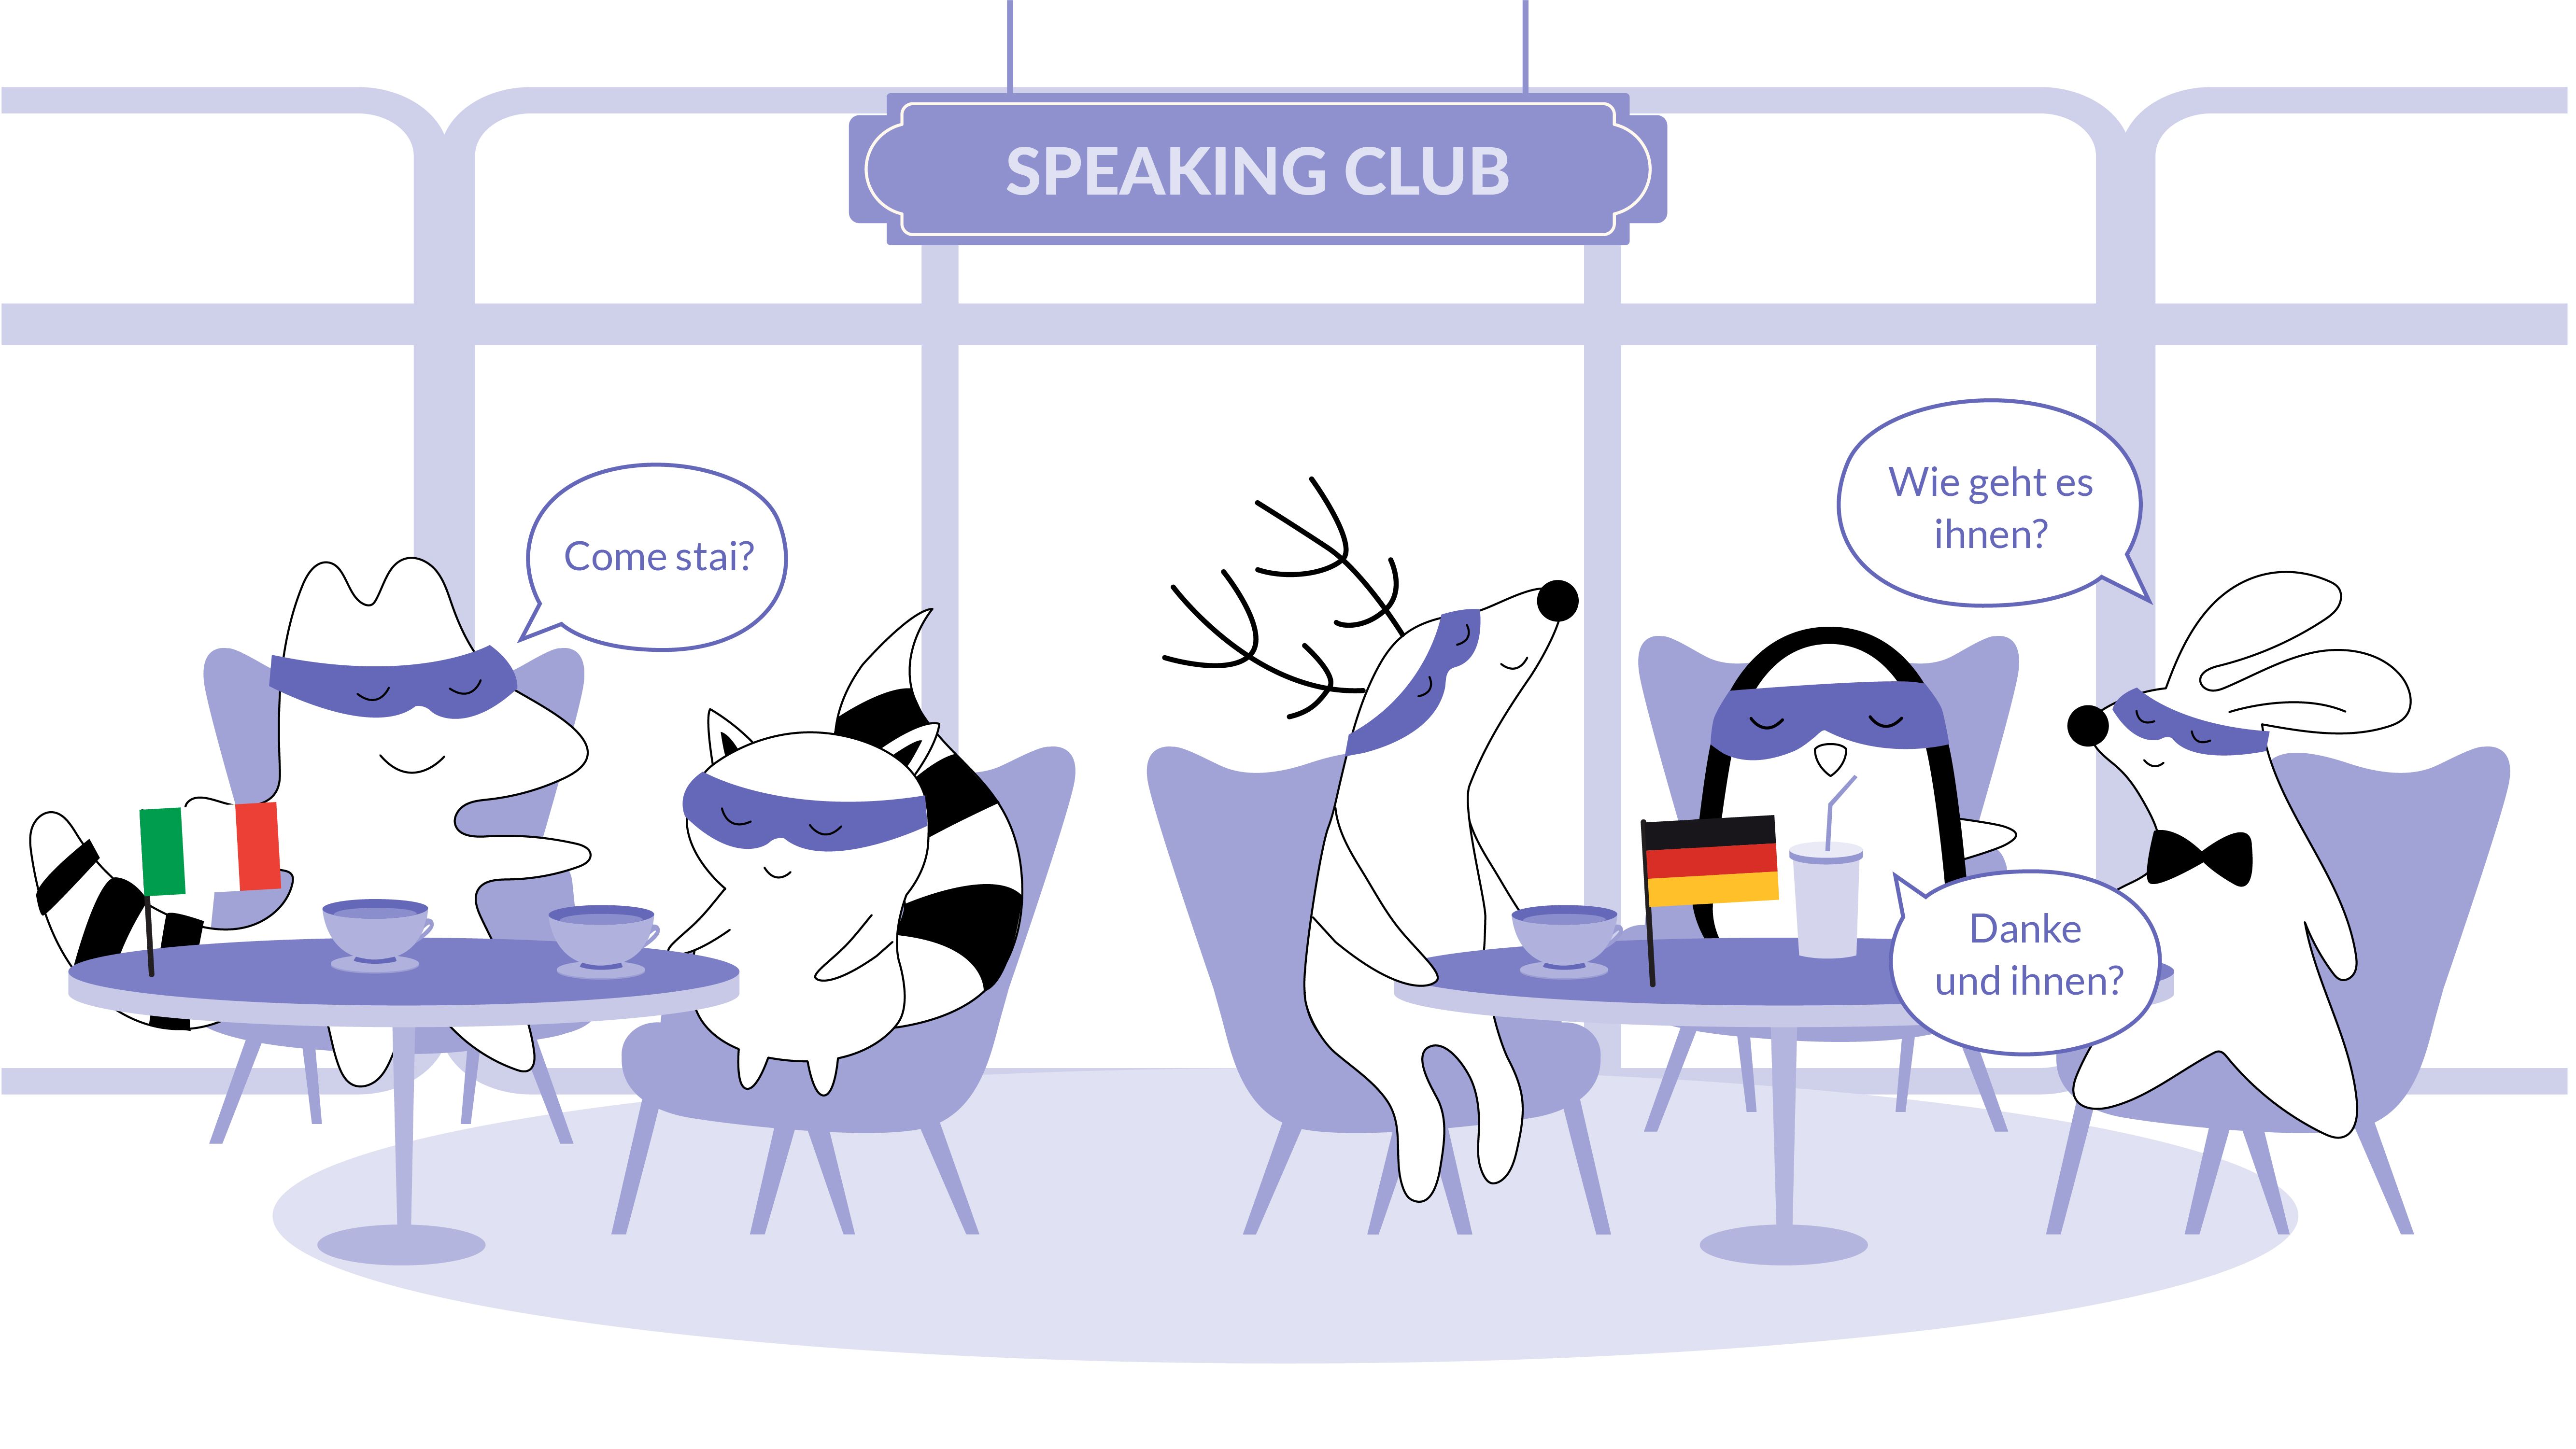 Iggy, Pocky, Benji, and Soren are at the coffee shop, participating in a speaking club.